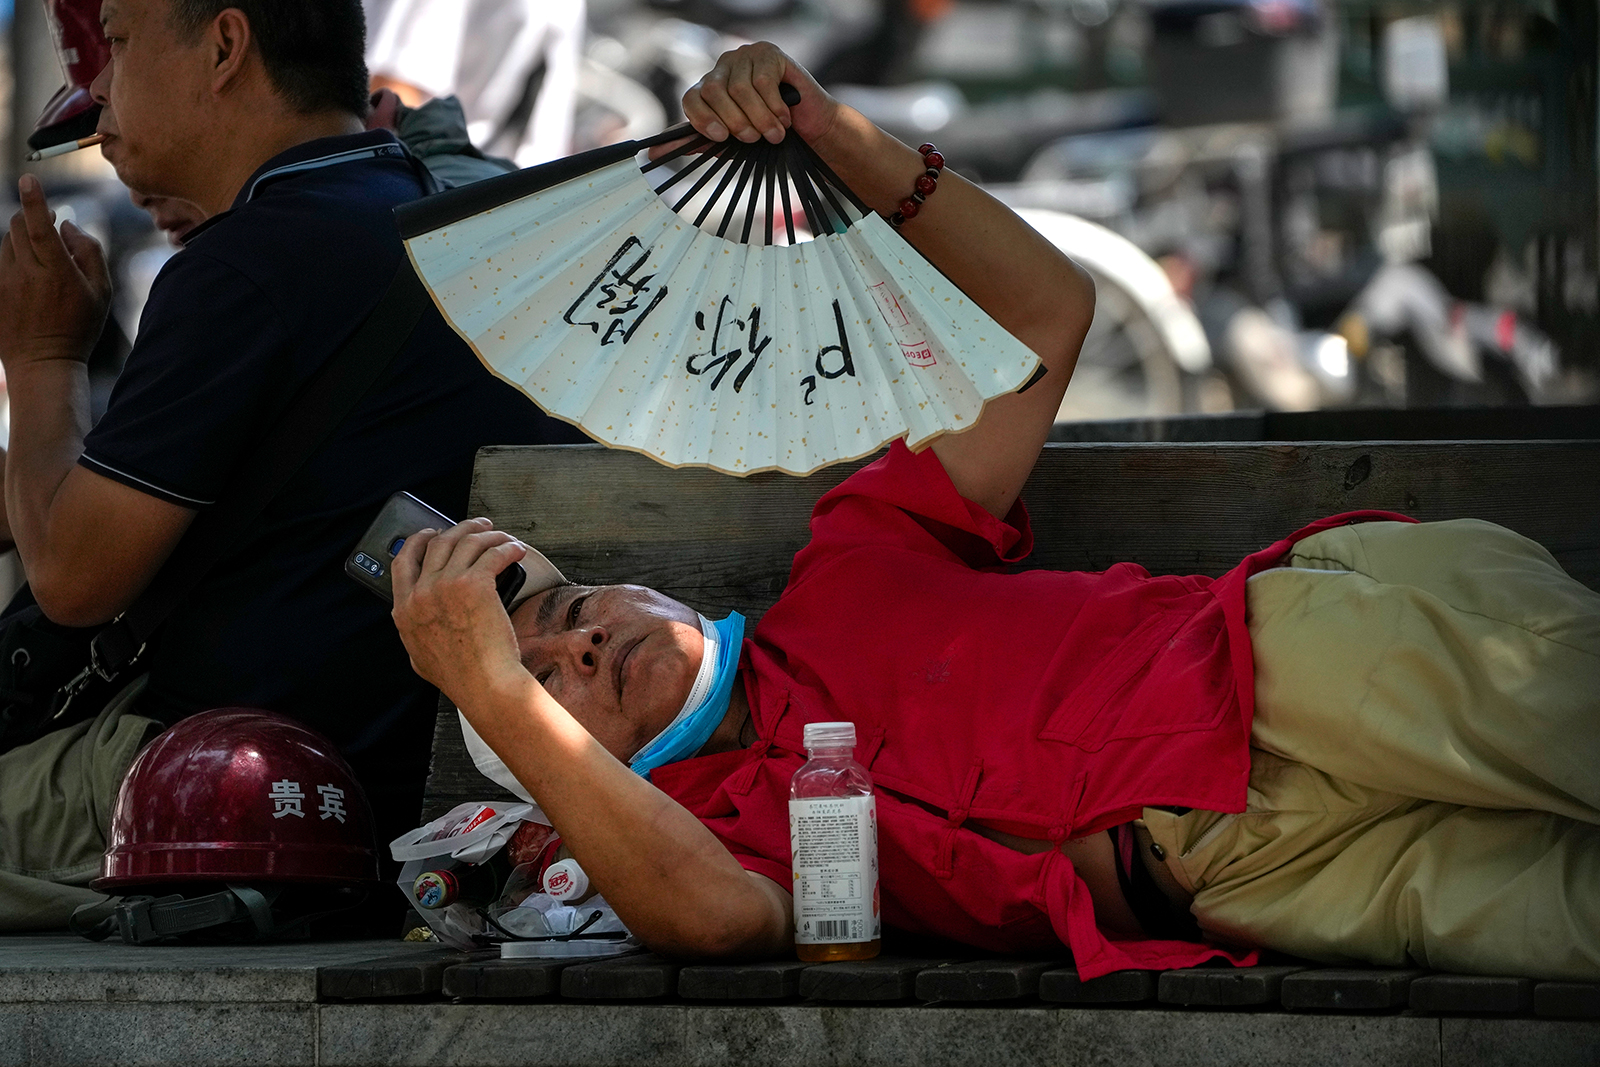 A man cools himself with a fan while browsing his phone on a hot day in Beijing, on July 16.